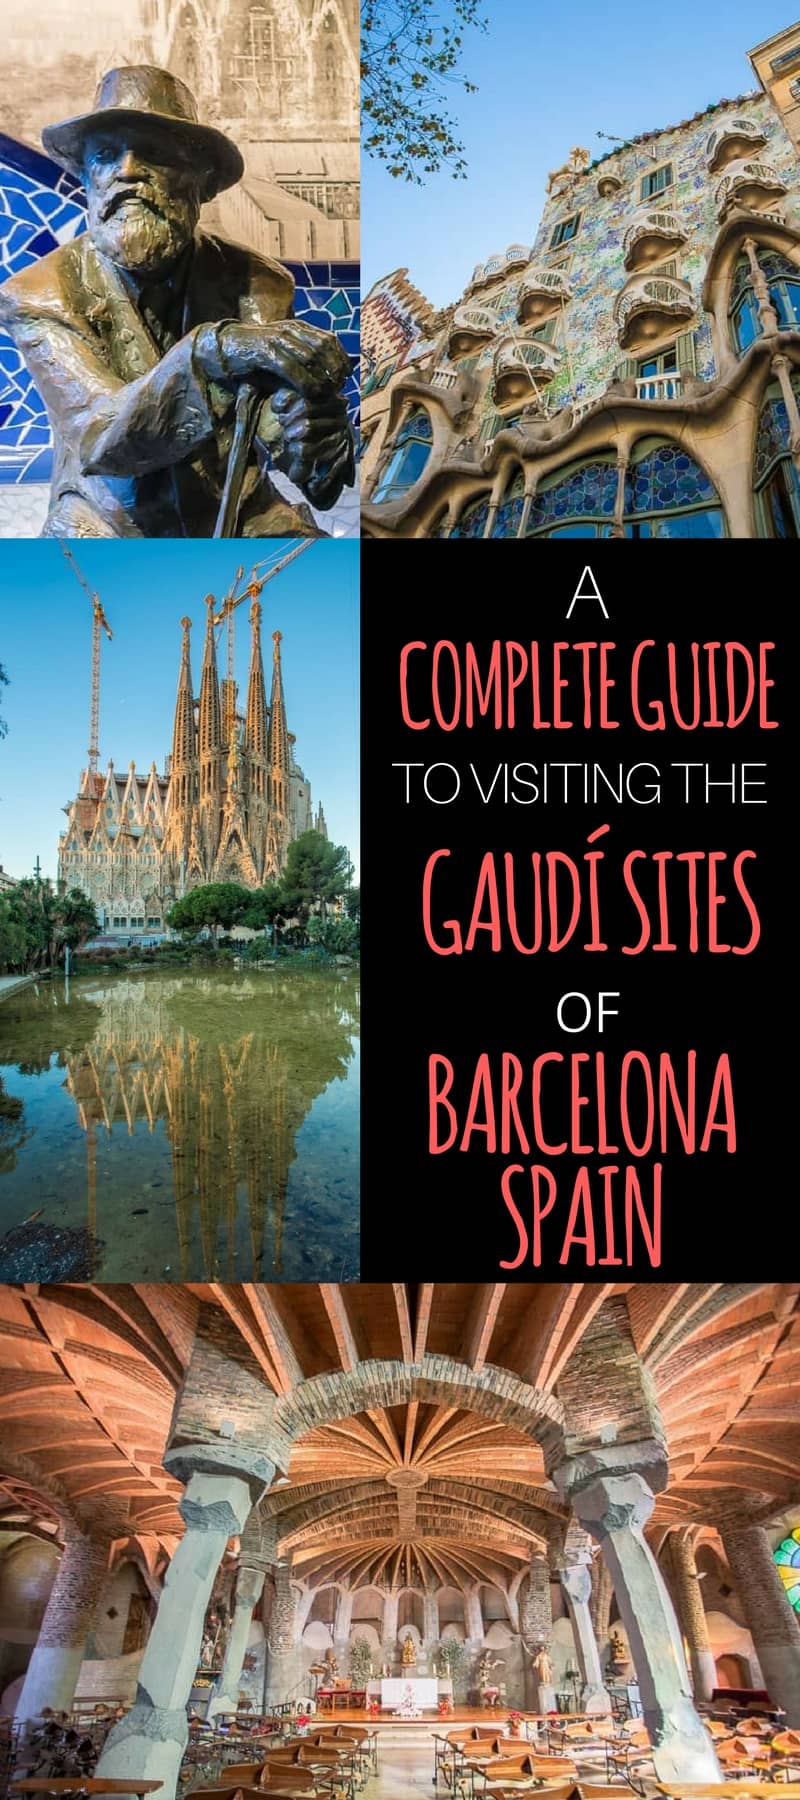 Complete guide to Antoni Gaudí sites in Barcelona Spain. Where to find them, when to visit, how to save money, and other visitor tips: